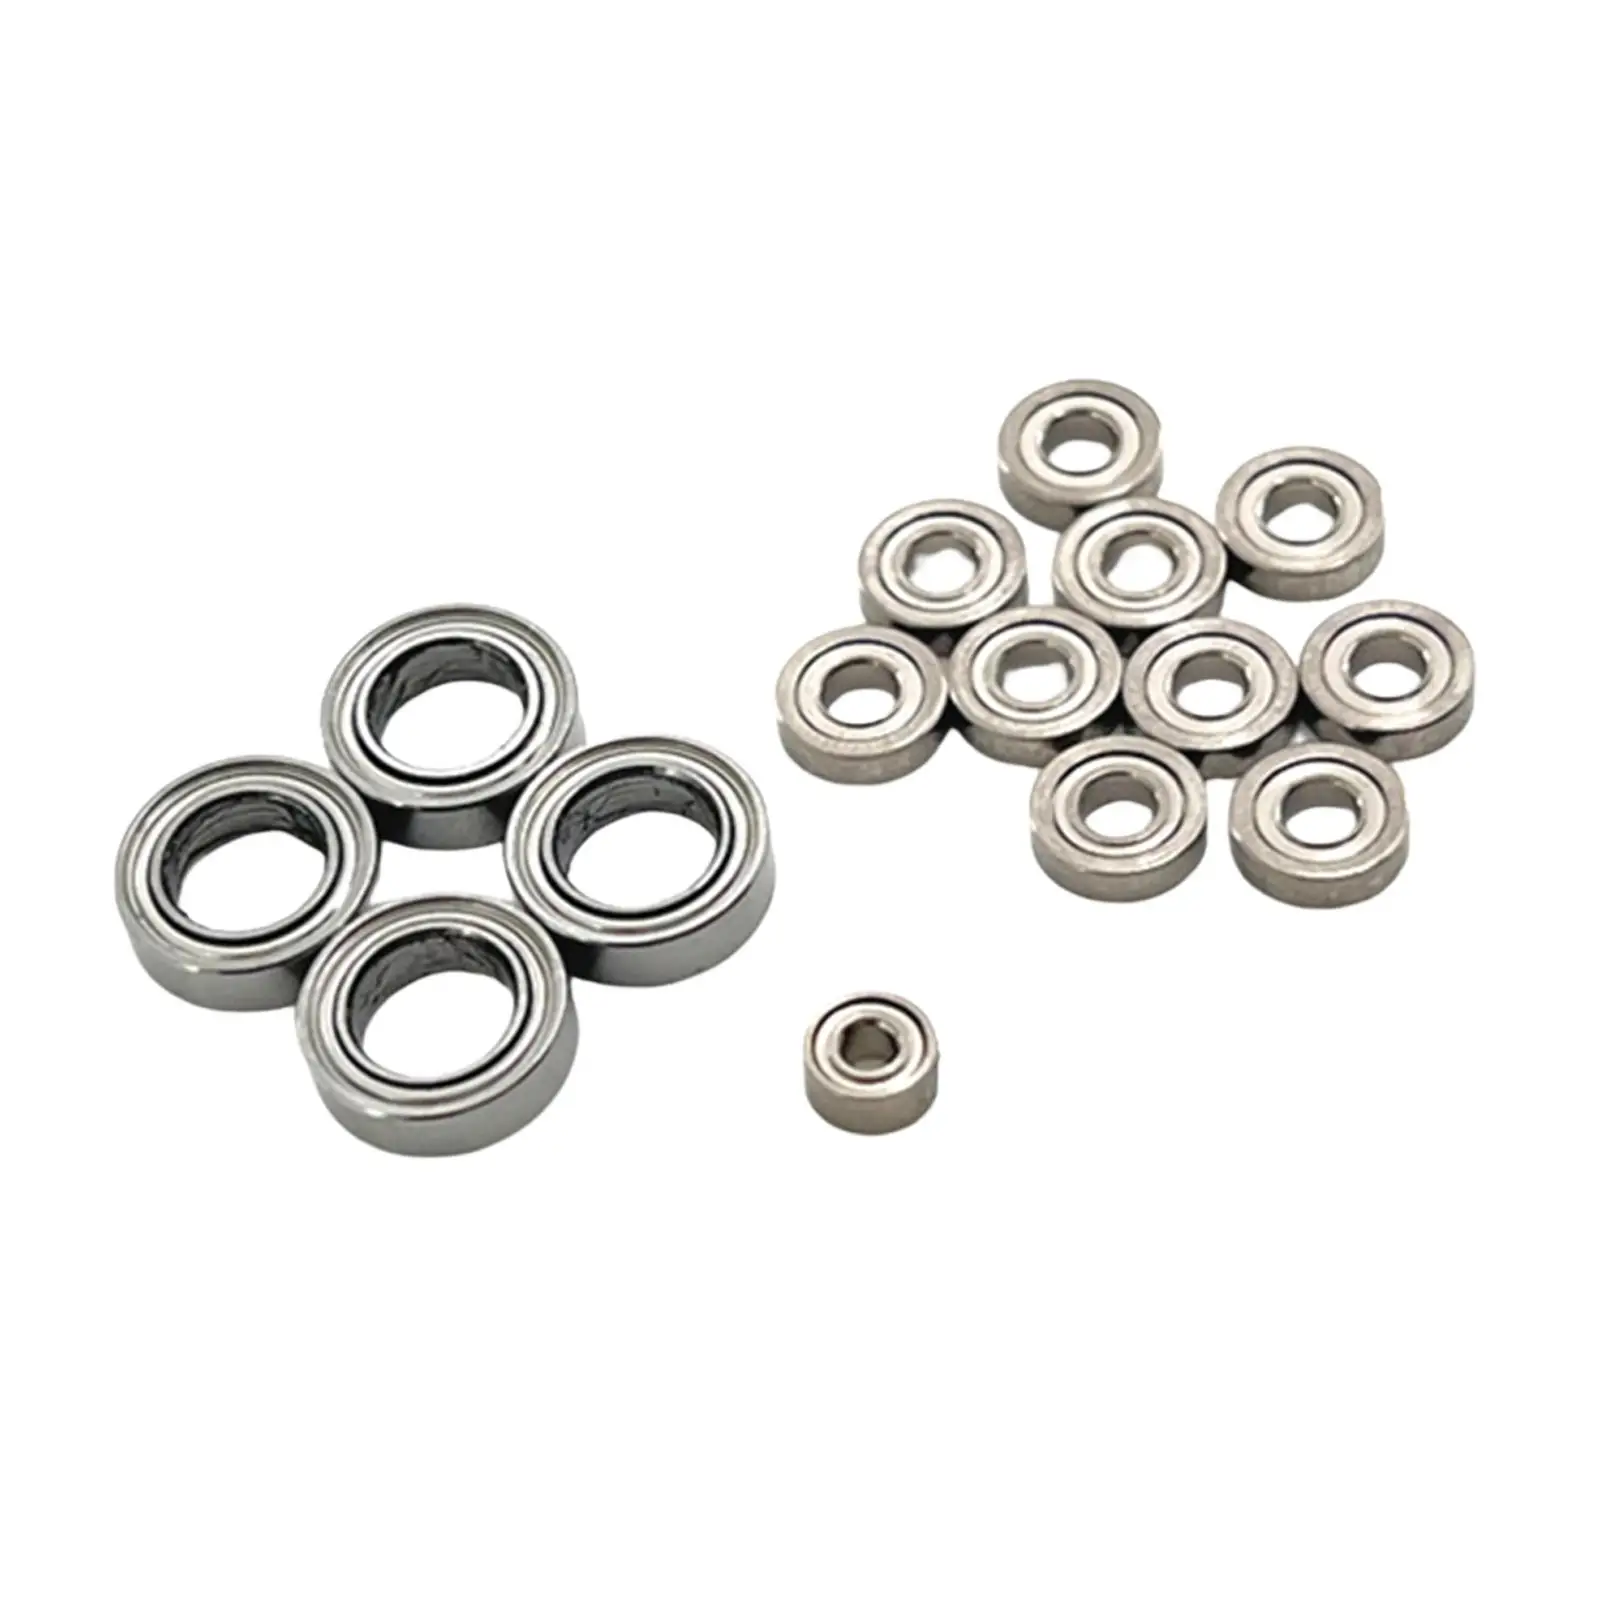 15Pcs Ball Bearings Durable Replacements for Wltoys 1/28 Scale RC Car Crawler